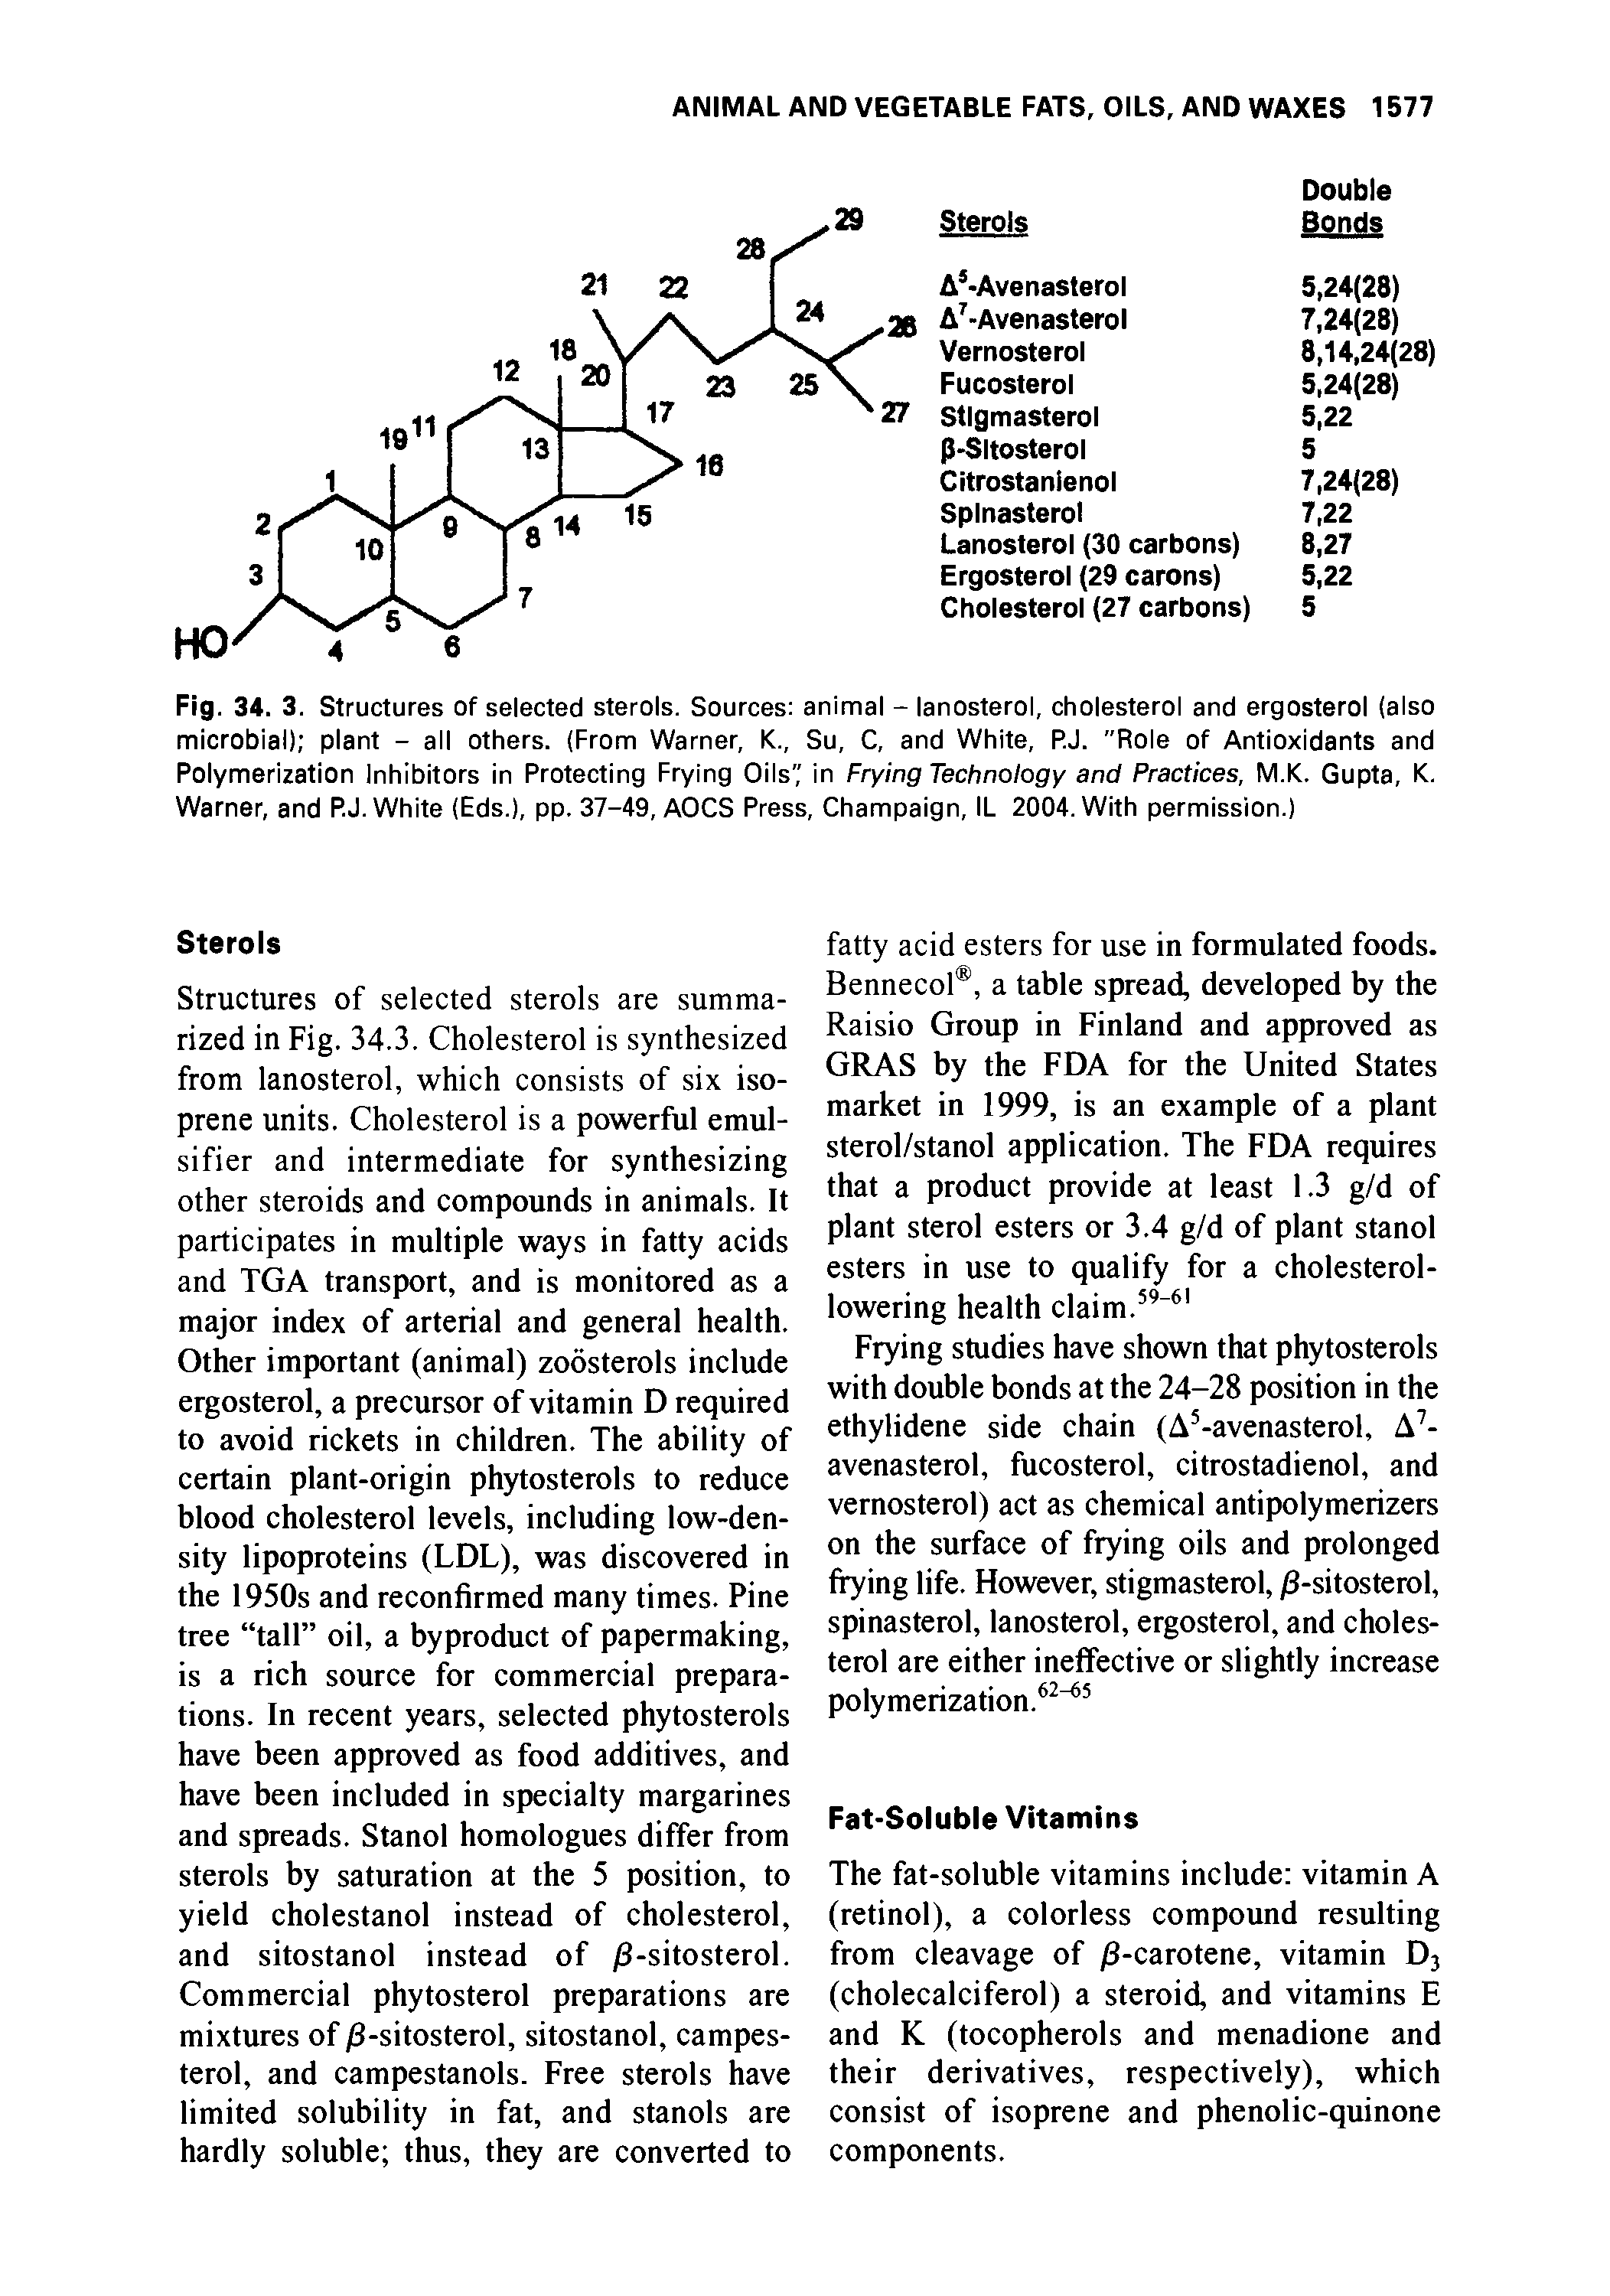 Fig. 34. 3. Structures of selected sterols. Sources animal - lanosterol, cholesterol and ergosterol (also microbial) plant - all others. (From Warner, K., Su, C, and White, P.J. "Role of Antioxidants and Polymerization Inhibitors in Protecting Frying Oils" in Frying Technology and Practices, M.K. Gupta, K. Warner, and P.J. White (Eds.), pp. 37-49, AOCS Press, Champaign, IL 2004. With permission.)...